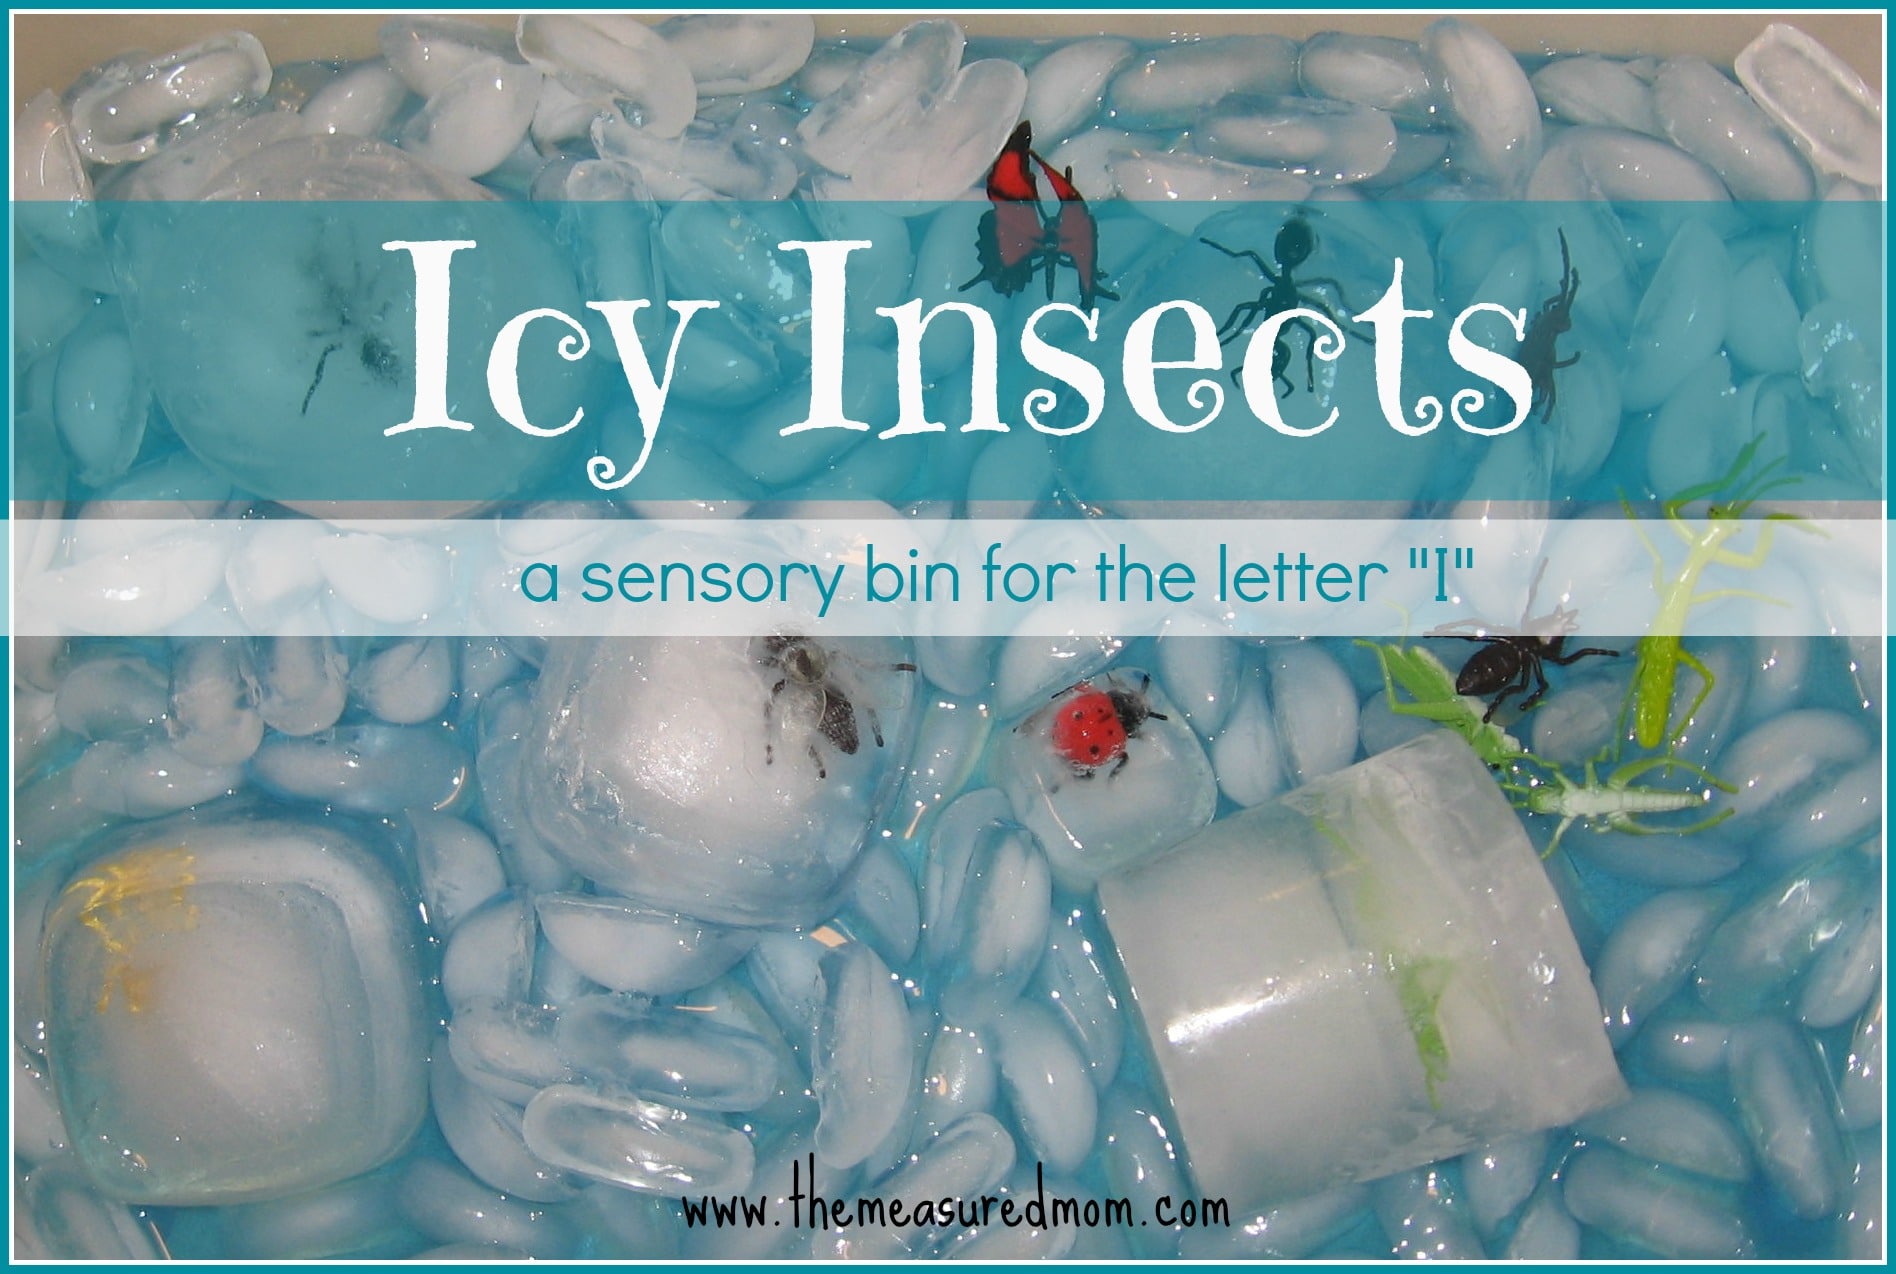 Icy insect sensory bin - The Measured Mom